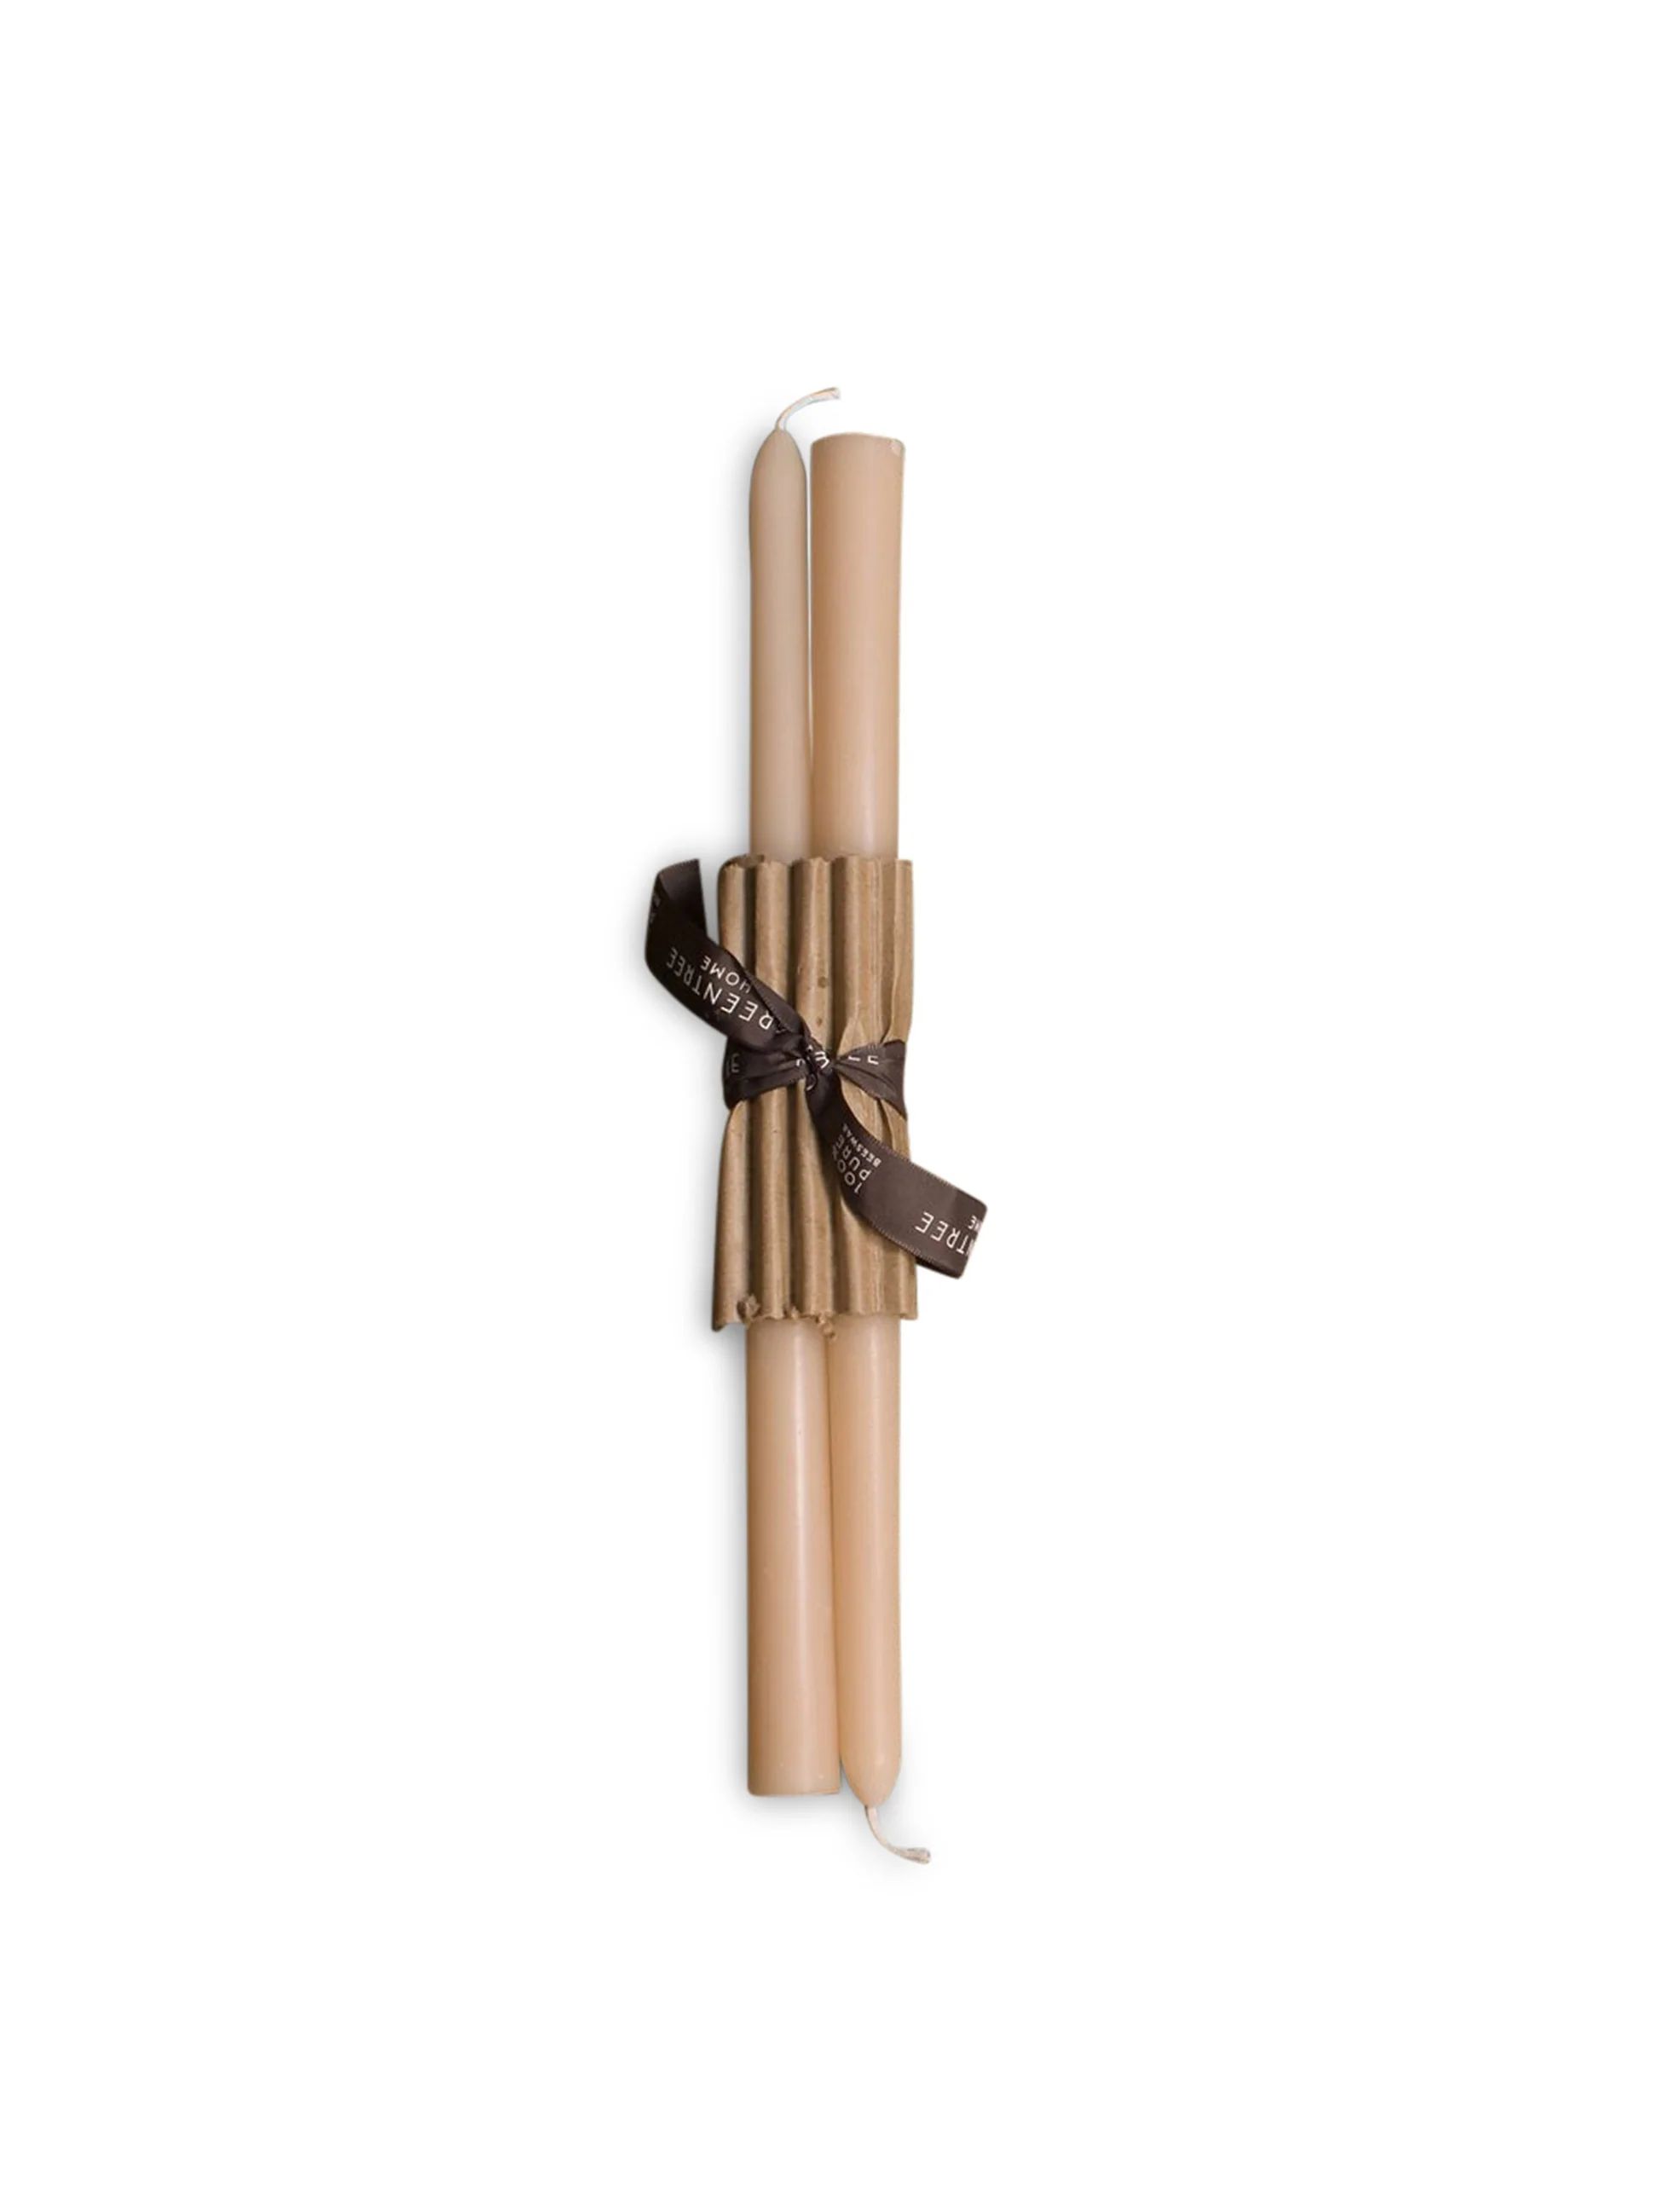 Greentree Home Candle Everyday Tapers Blush | Weston Table